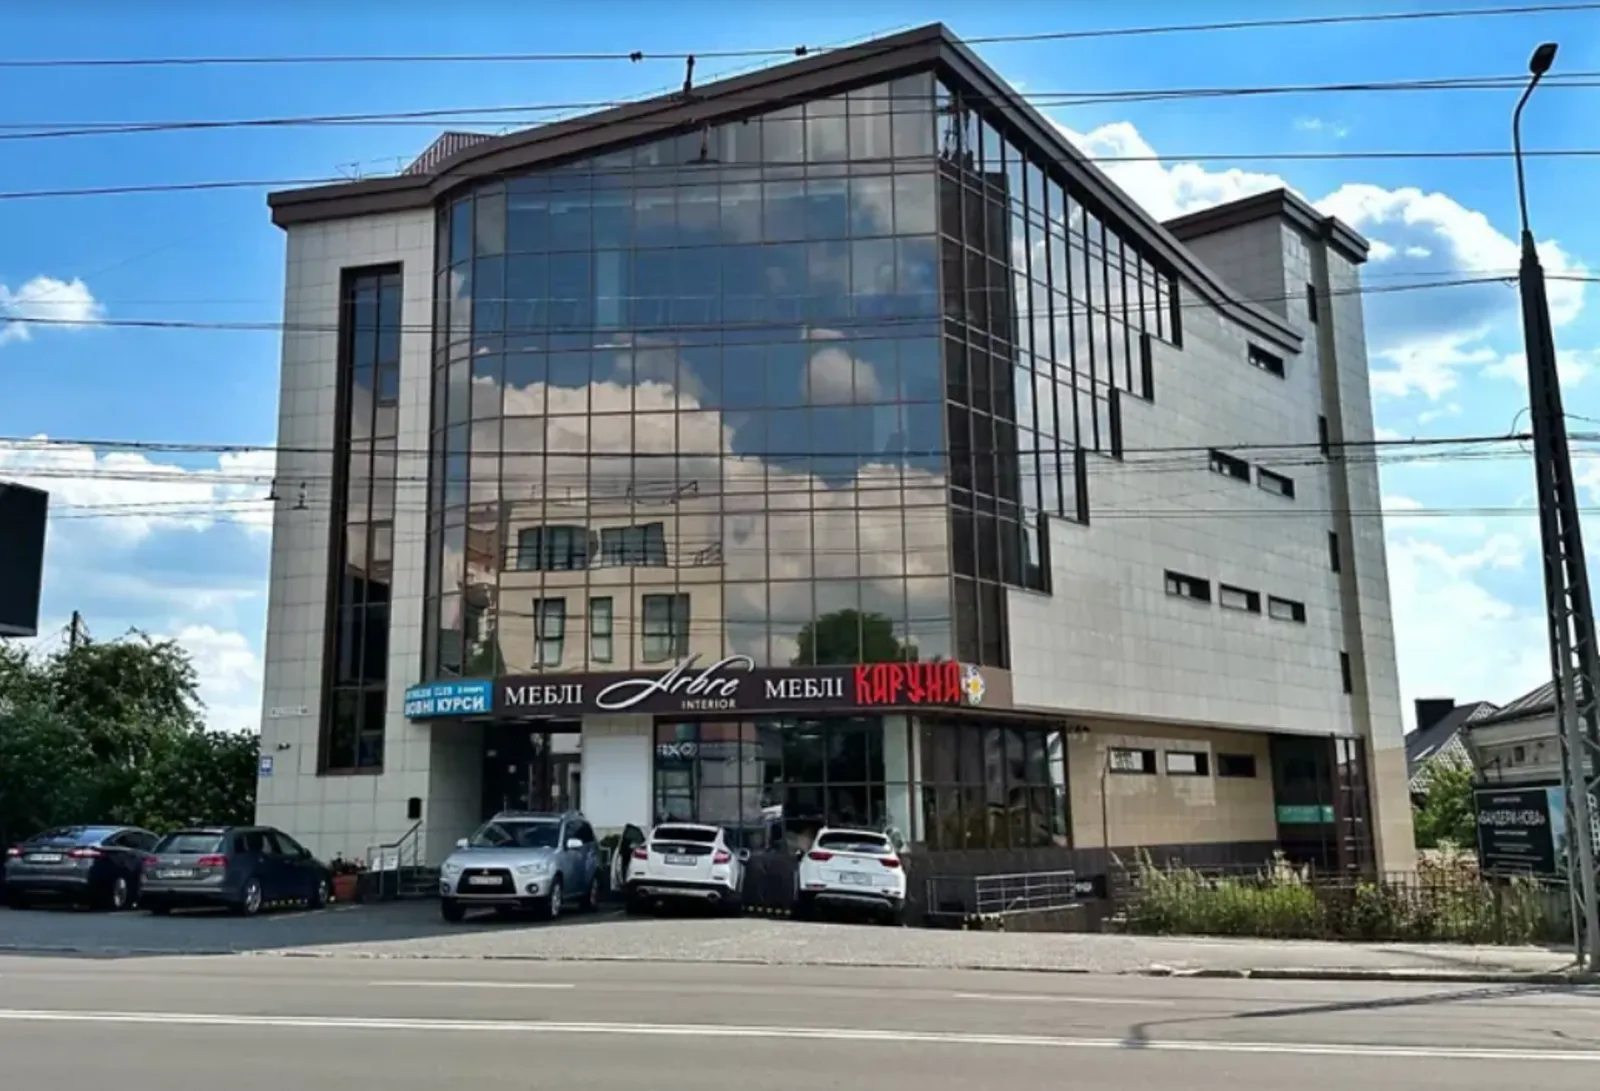 Real estate for sale for commercial purposes. 310 m², 1st floor/5 floors. Bandery S. pr., Ternopil. 